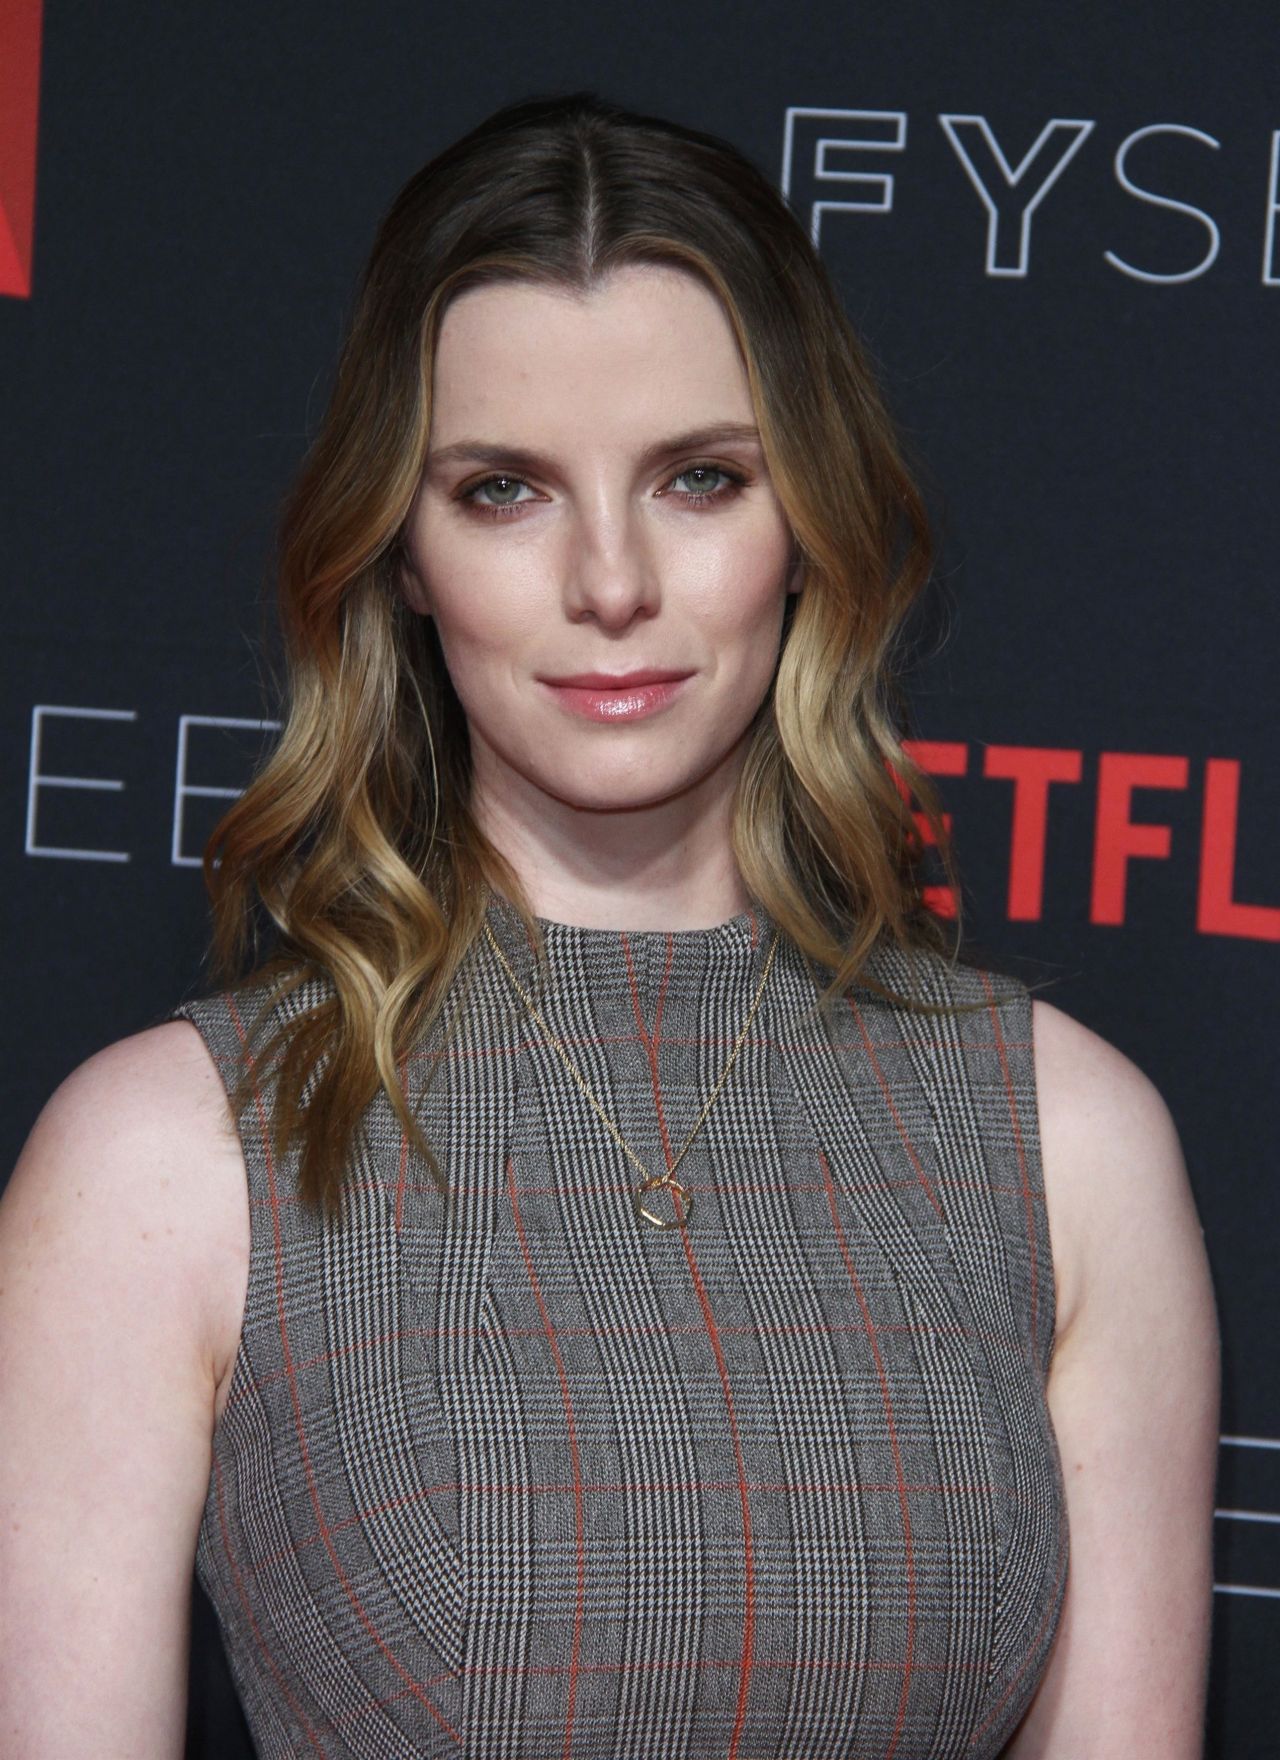 Betty Gilpin - Wiki, Biography, Family, Career, Relationships, Net ...